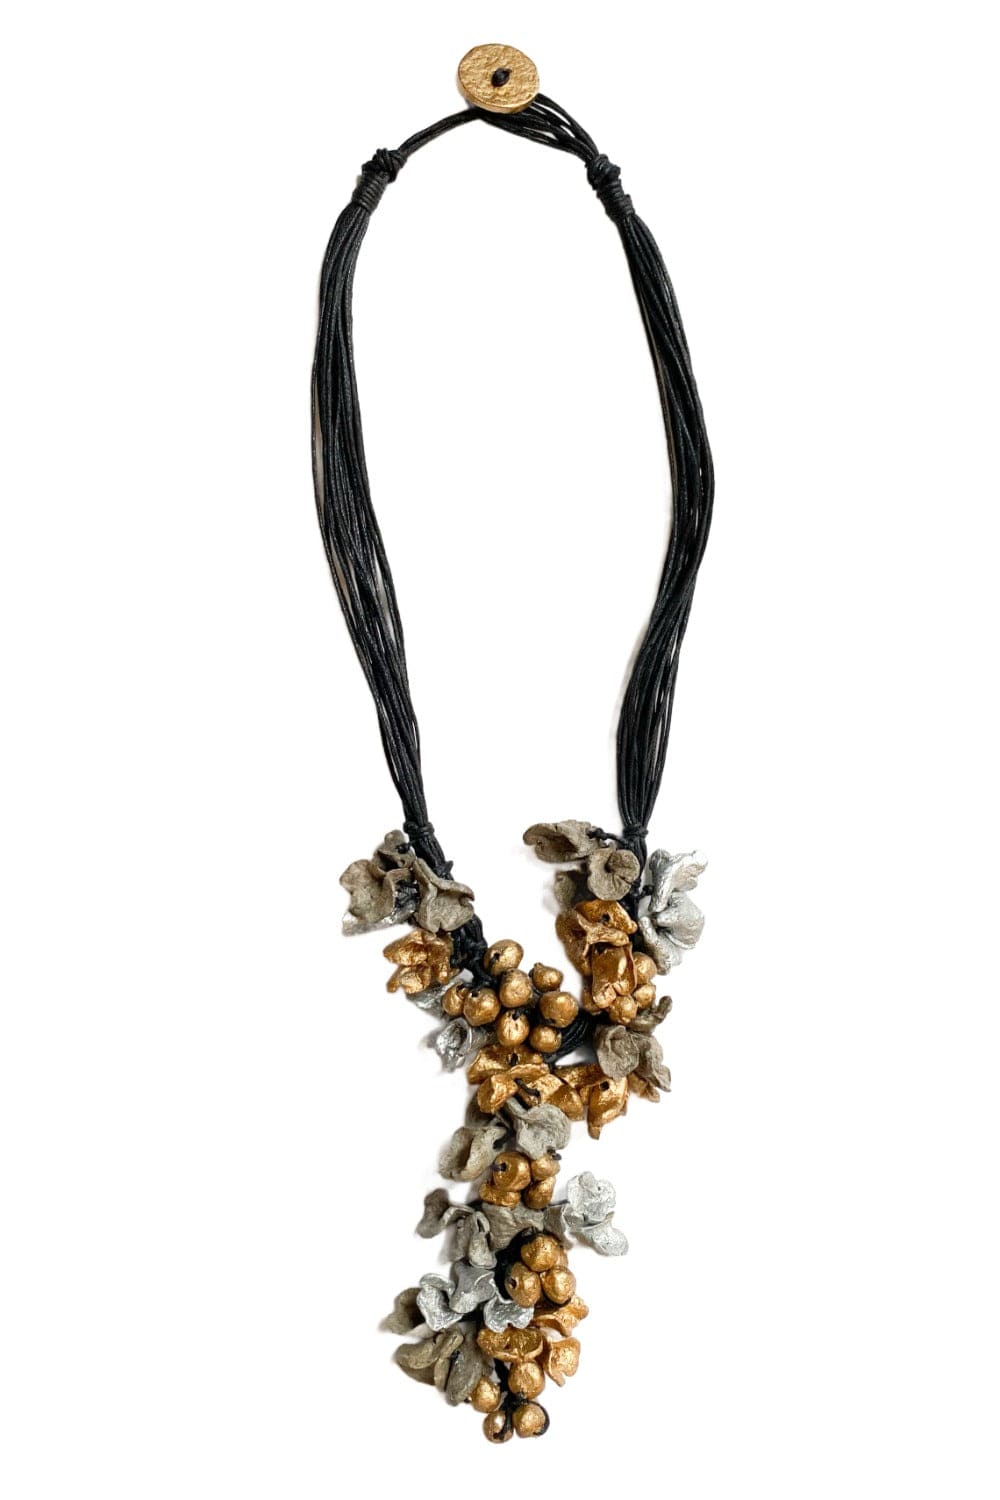 Papier Mache Necklace with gold and silver flowers.